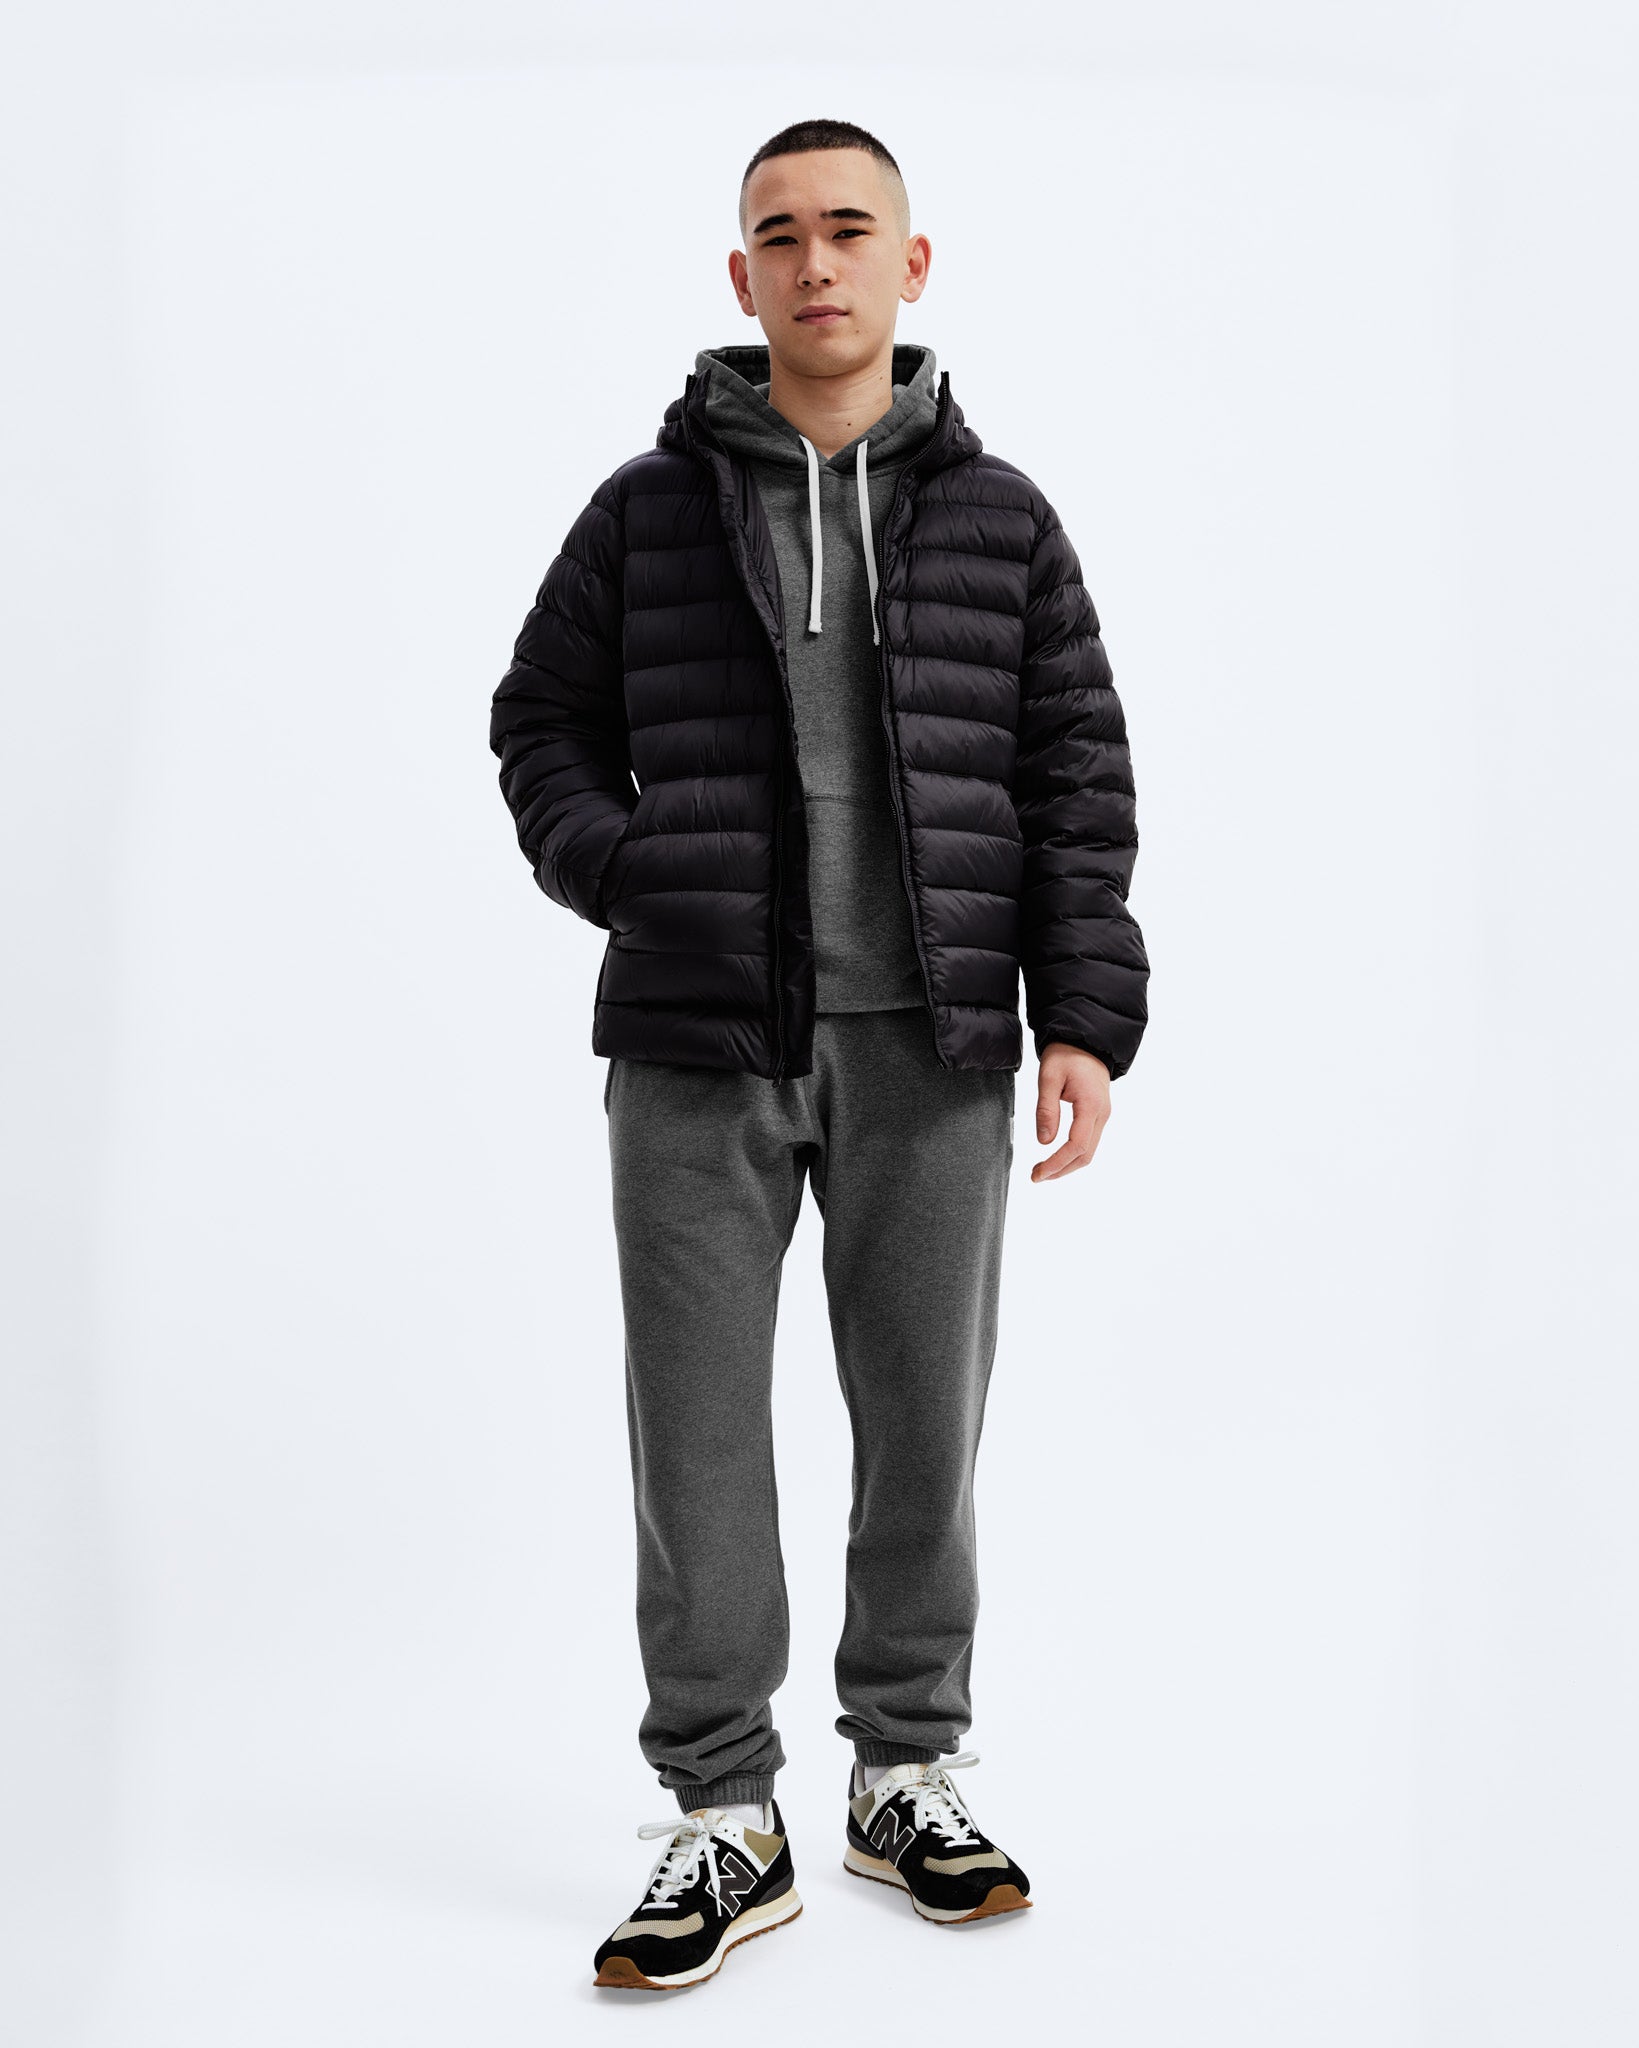 Midweight Terry Cuffed Sweatpant | Reigning Champ